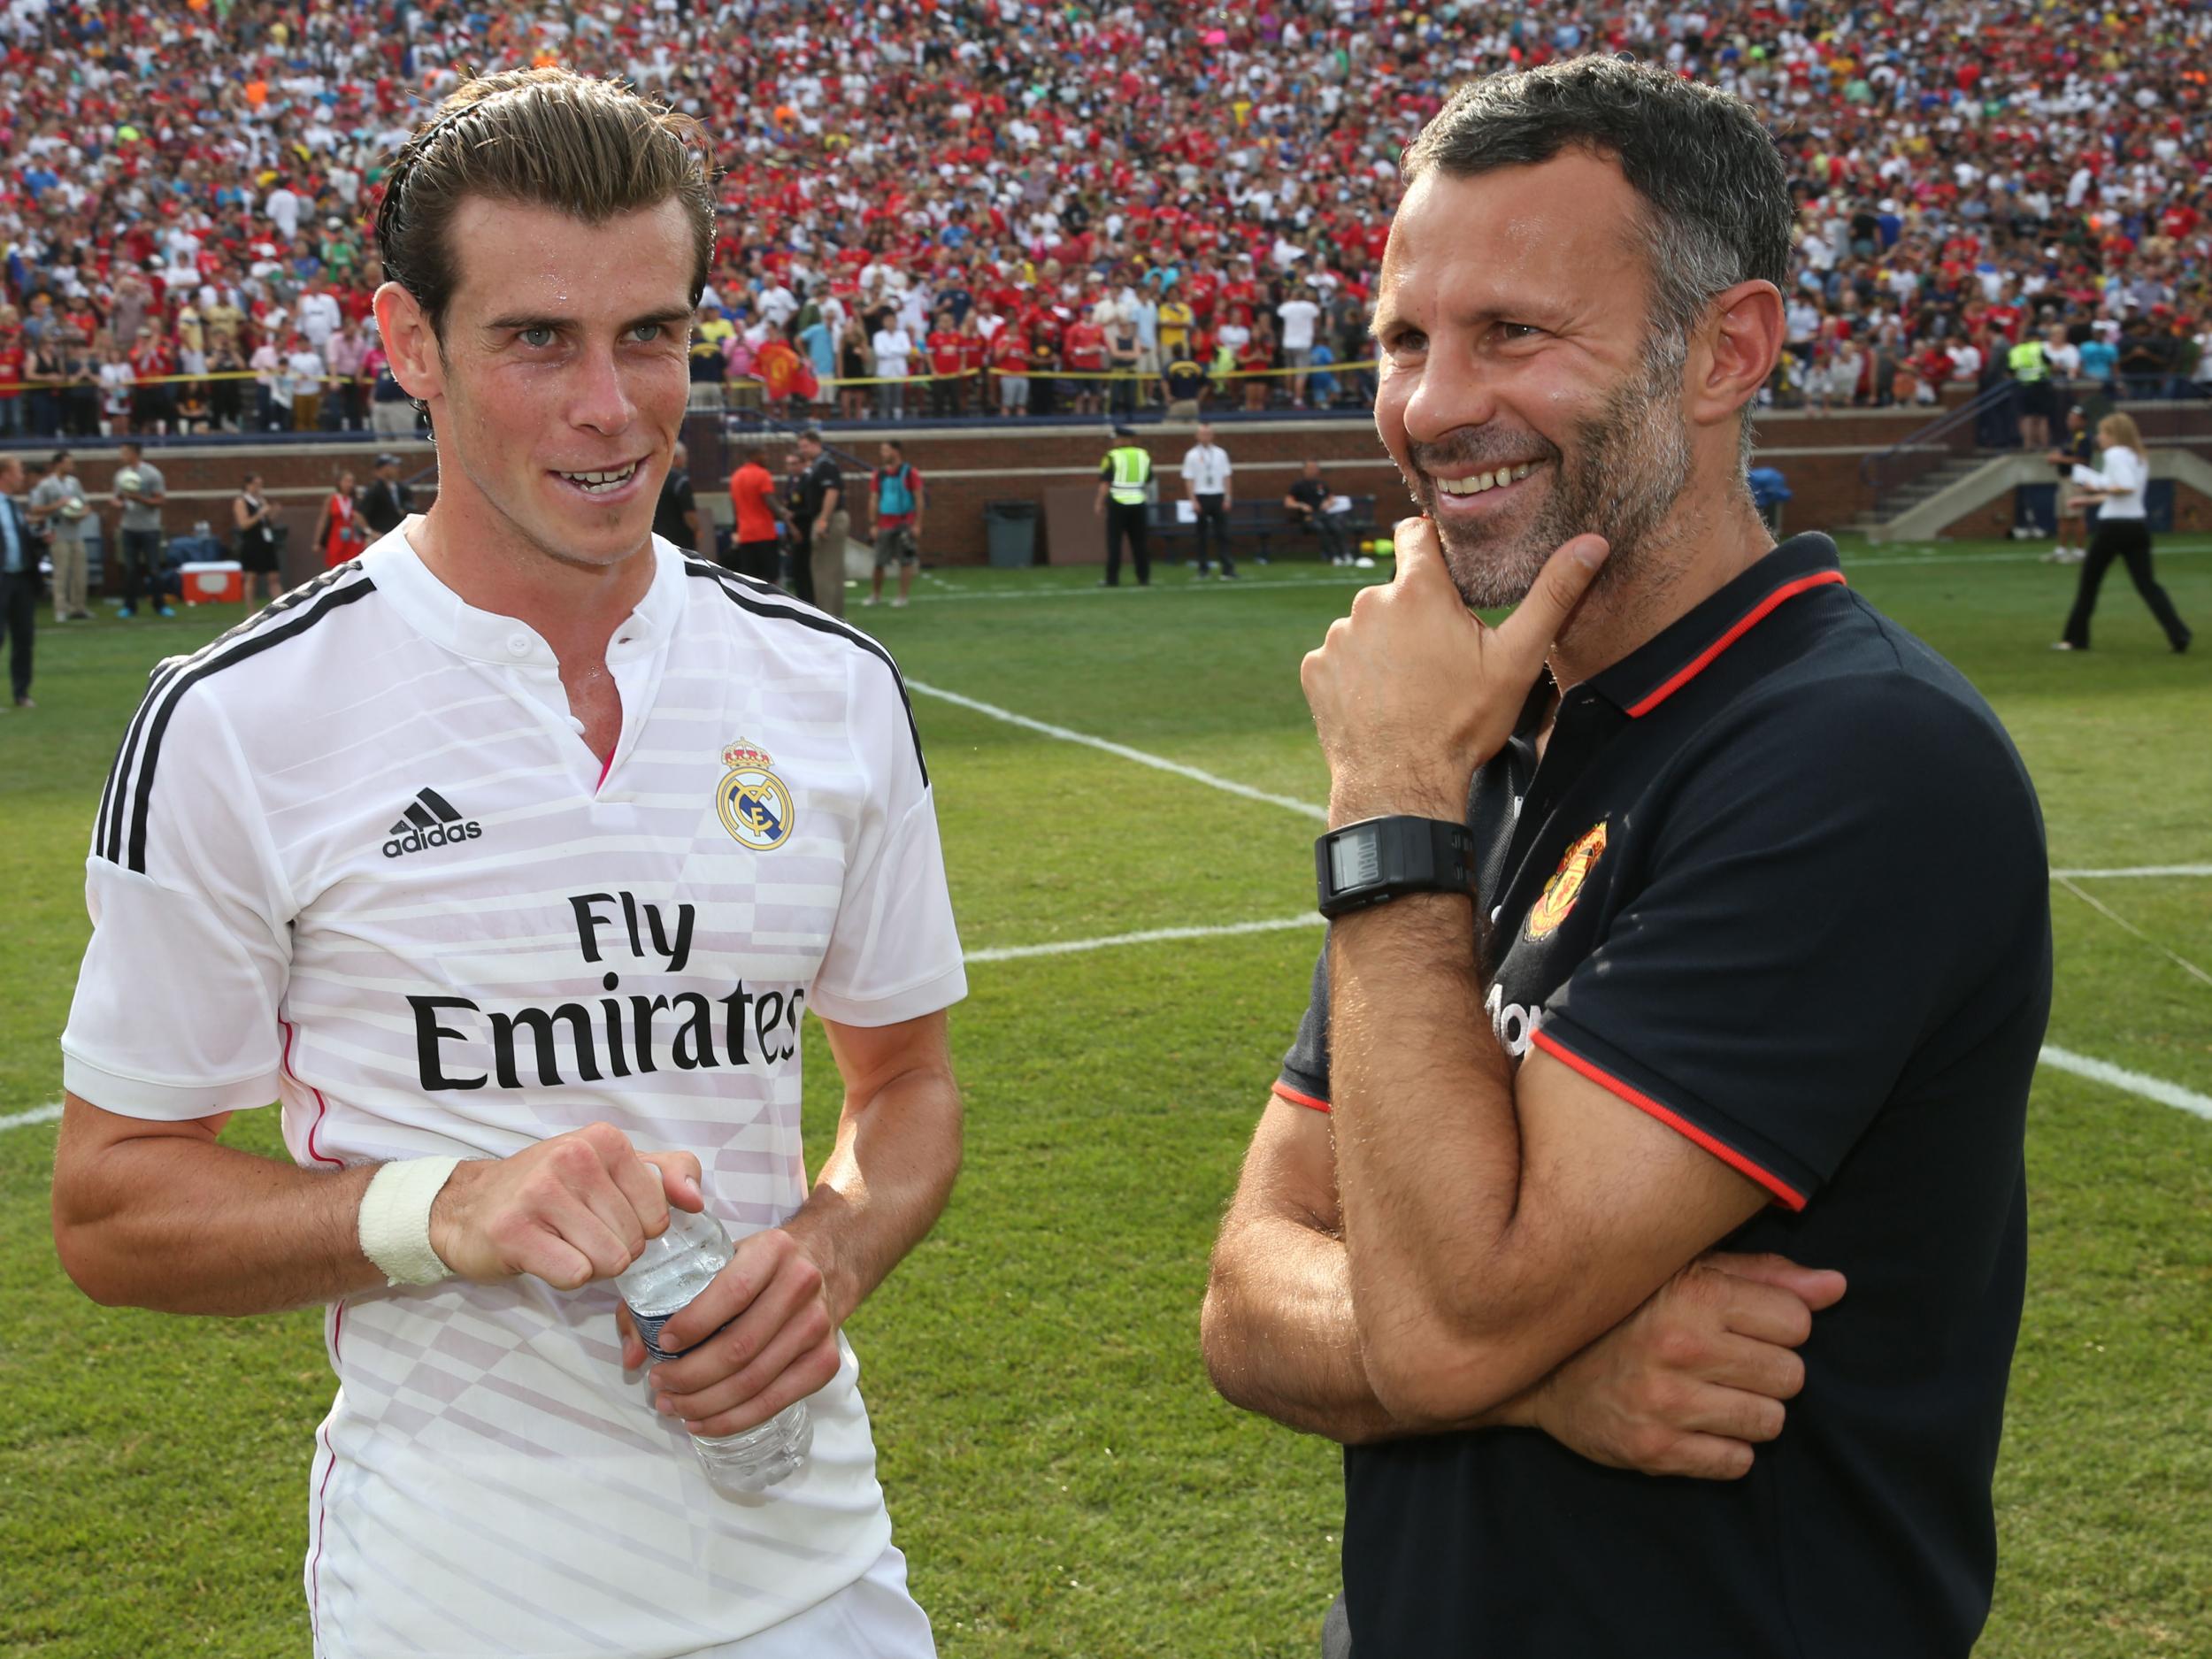 Giggs tried to persuade Bale to join Manchester United in 2013